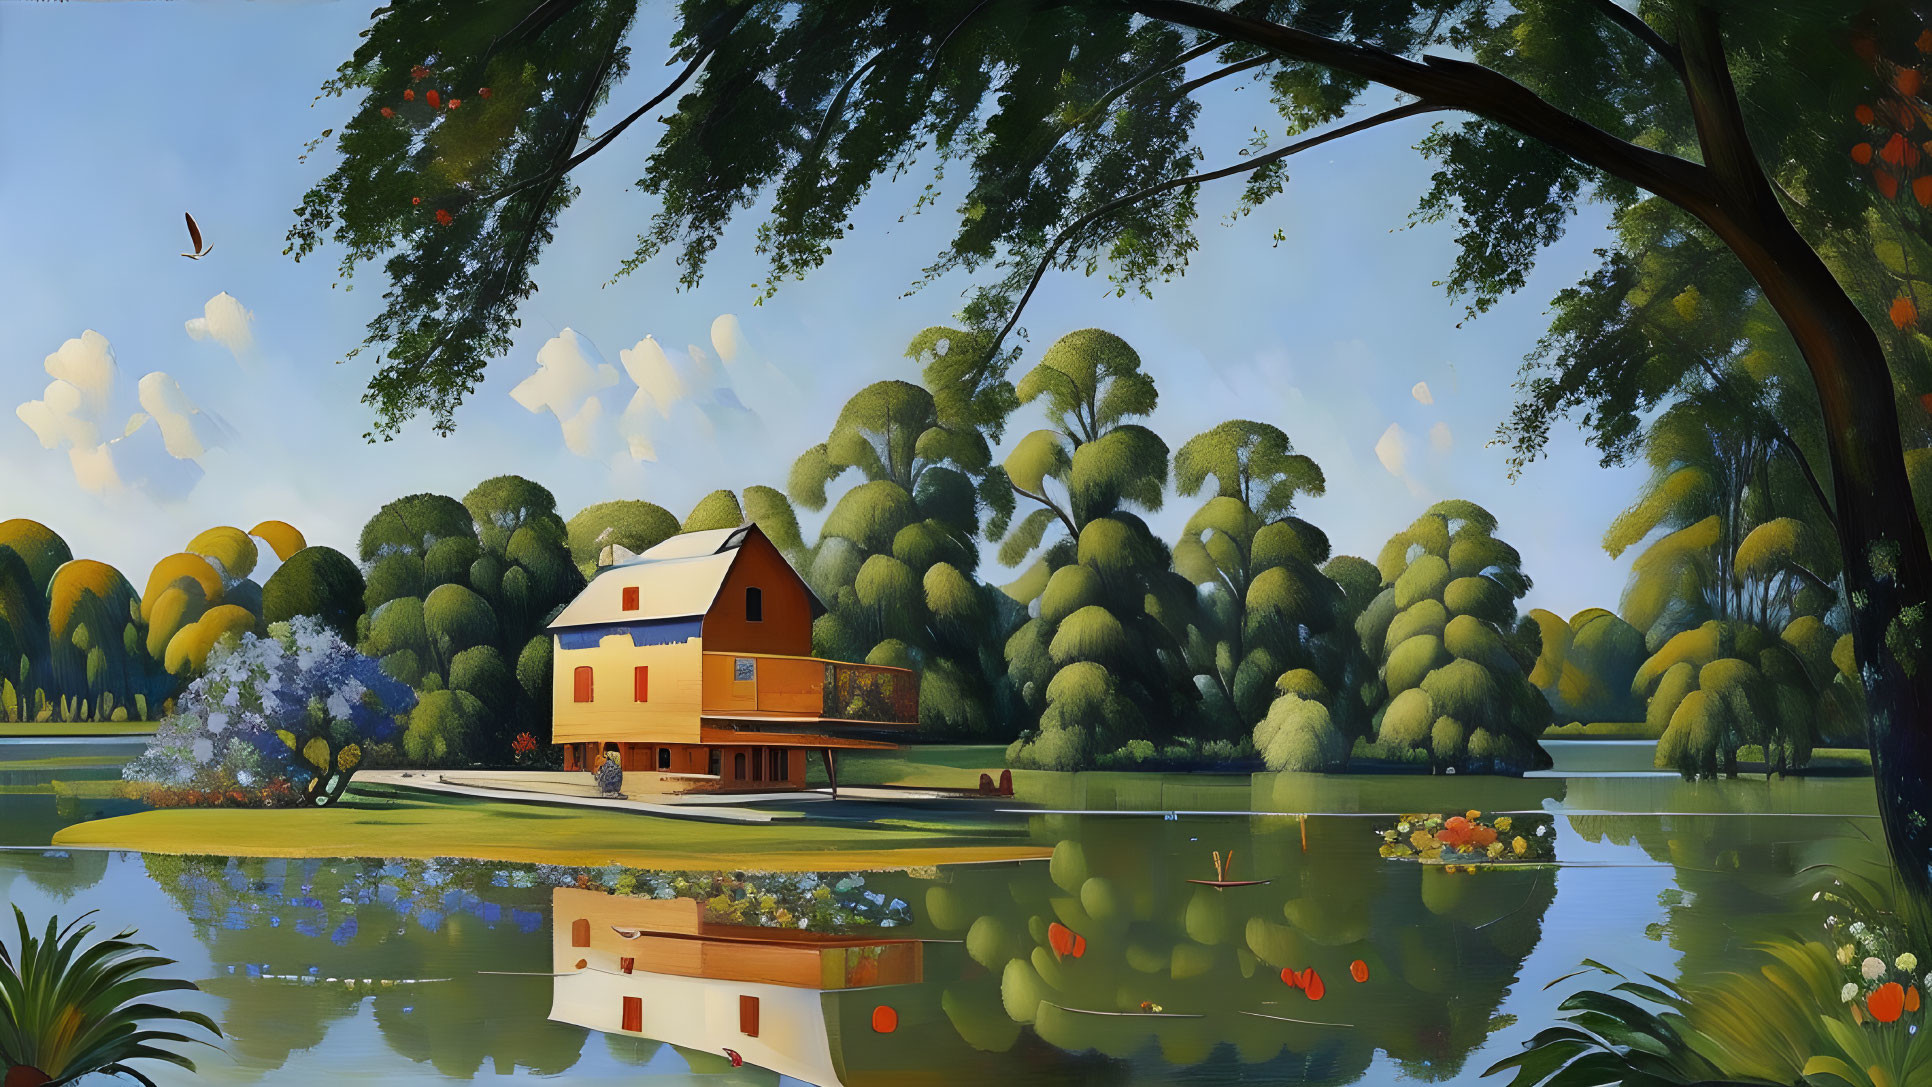 Tranquil landscape: house by calm lake, lush trees, clear sky & reflections